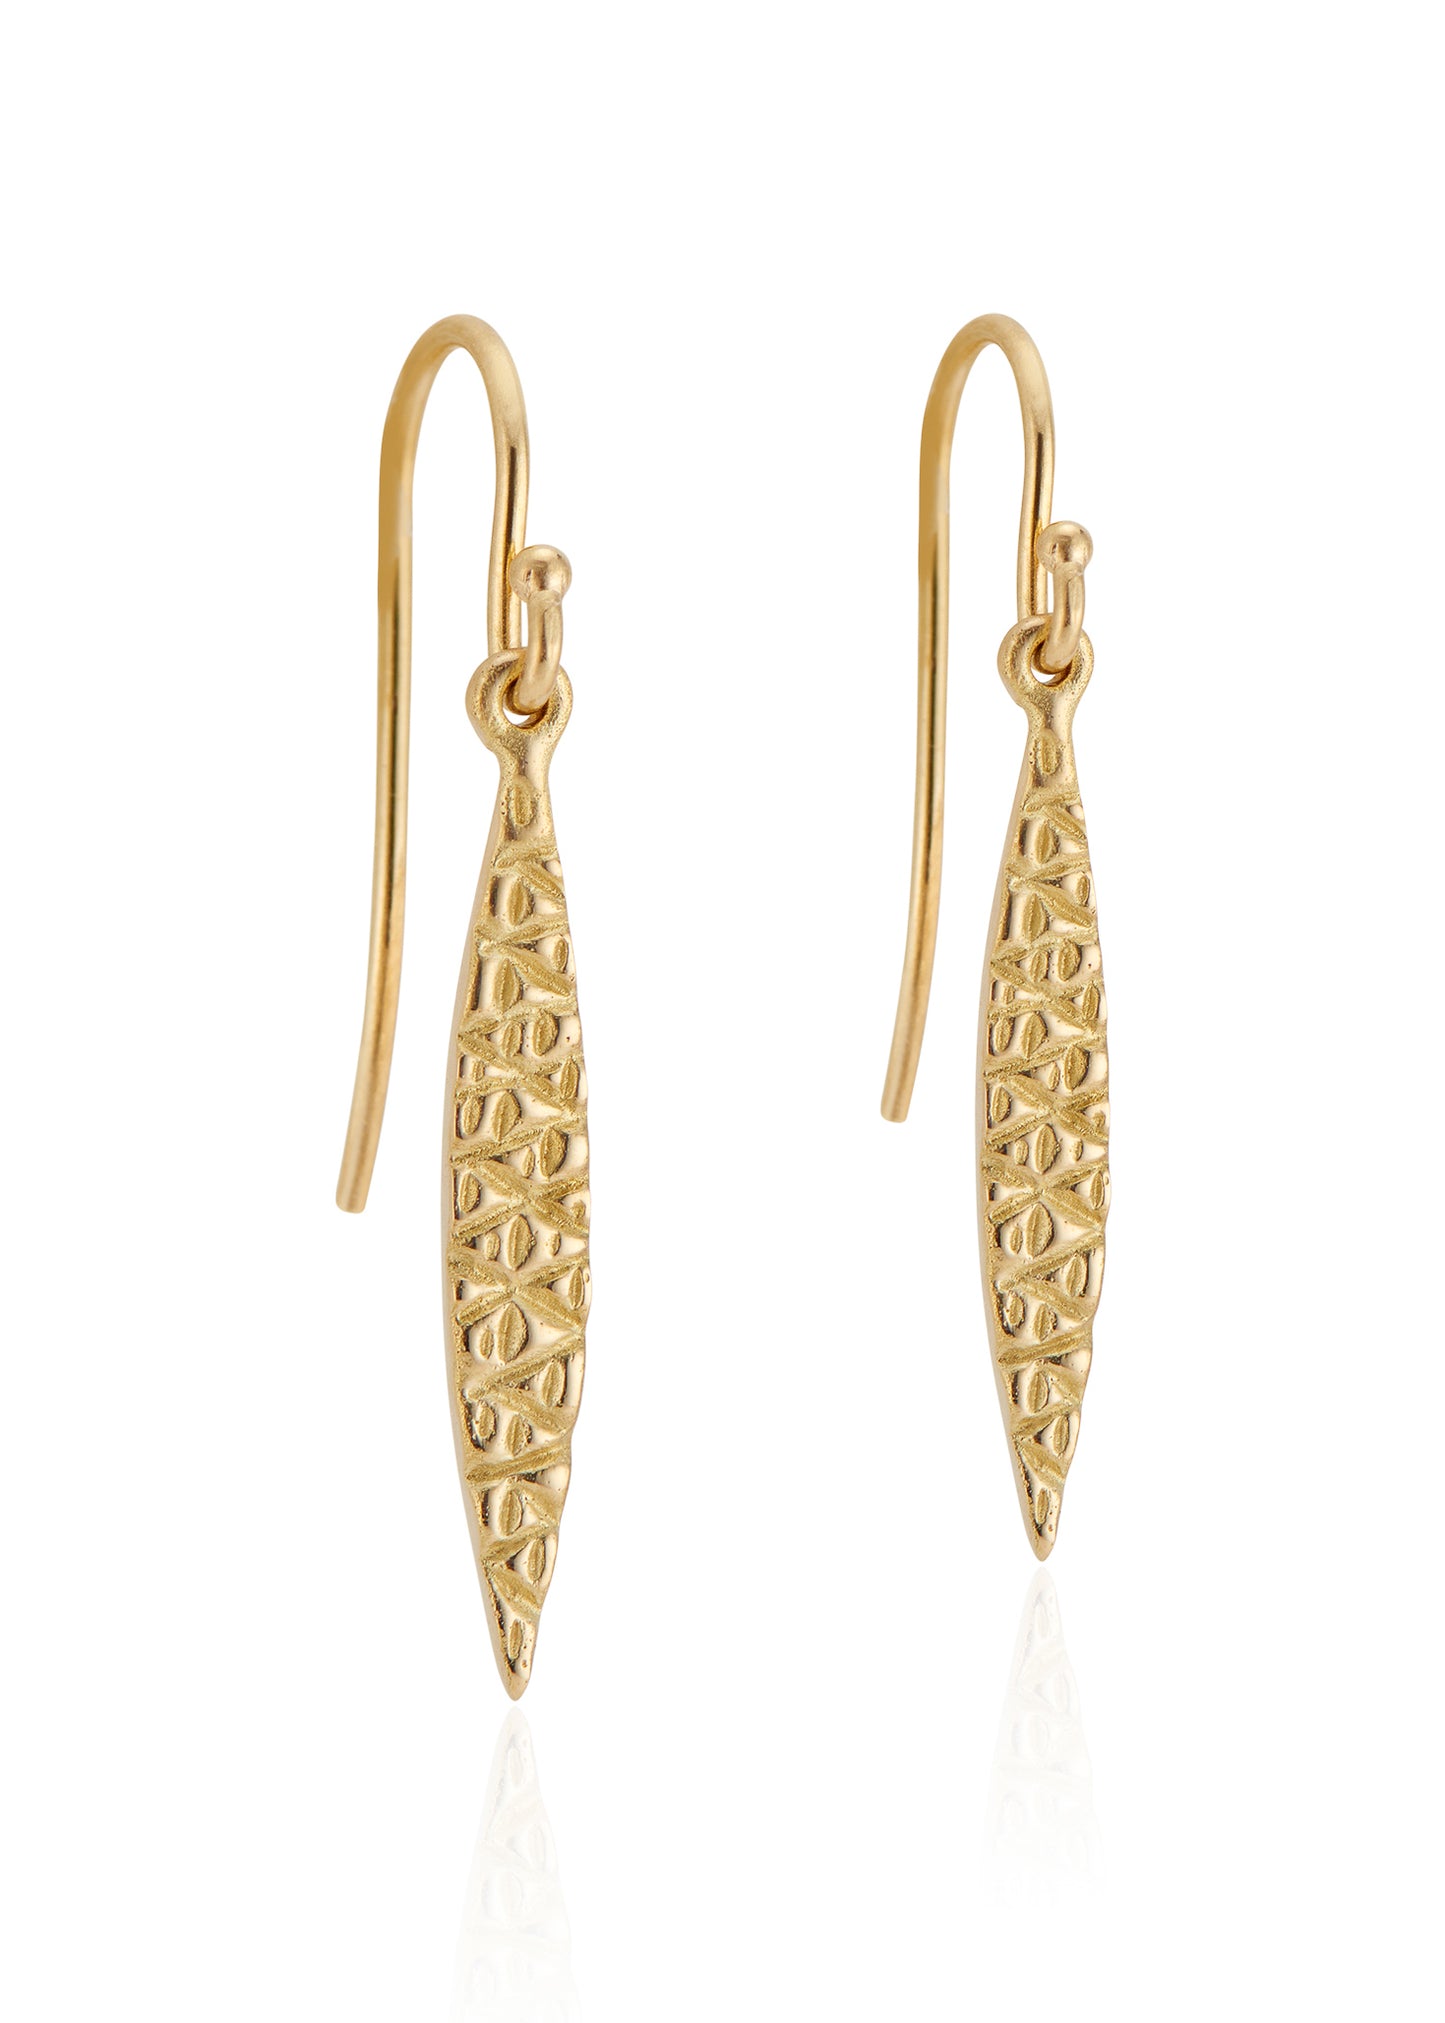 Inspired by the laurel wreaths bestowed to the victorious in ancient Greece, the intricately detailed patterns in the Laurel earring create a woven aesthetic, calling to mind the intertwining branches of foliage used to honor the triumphant. 